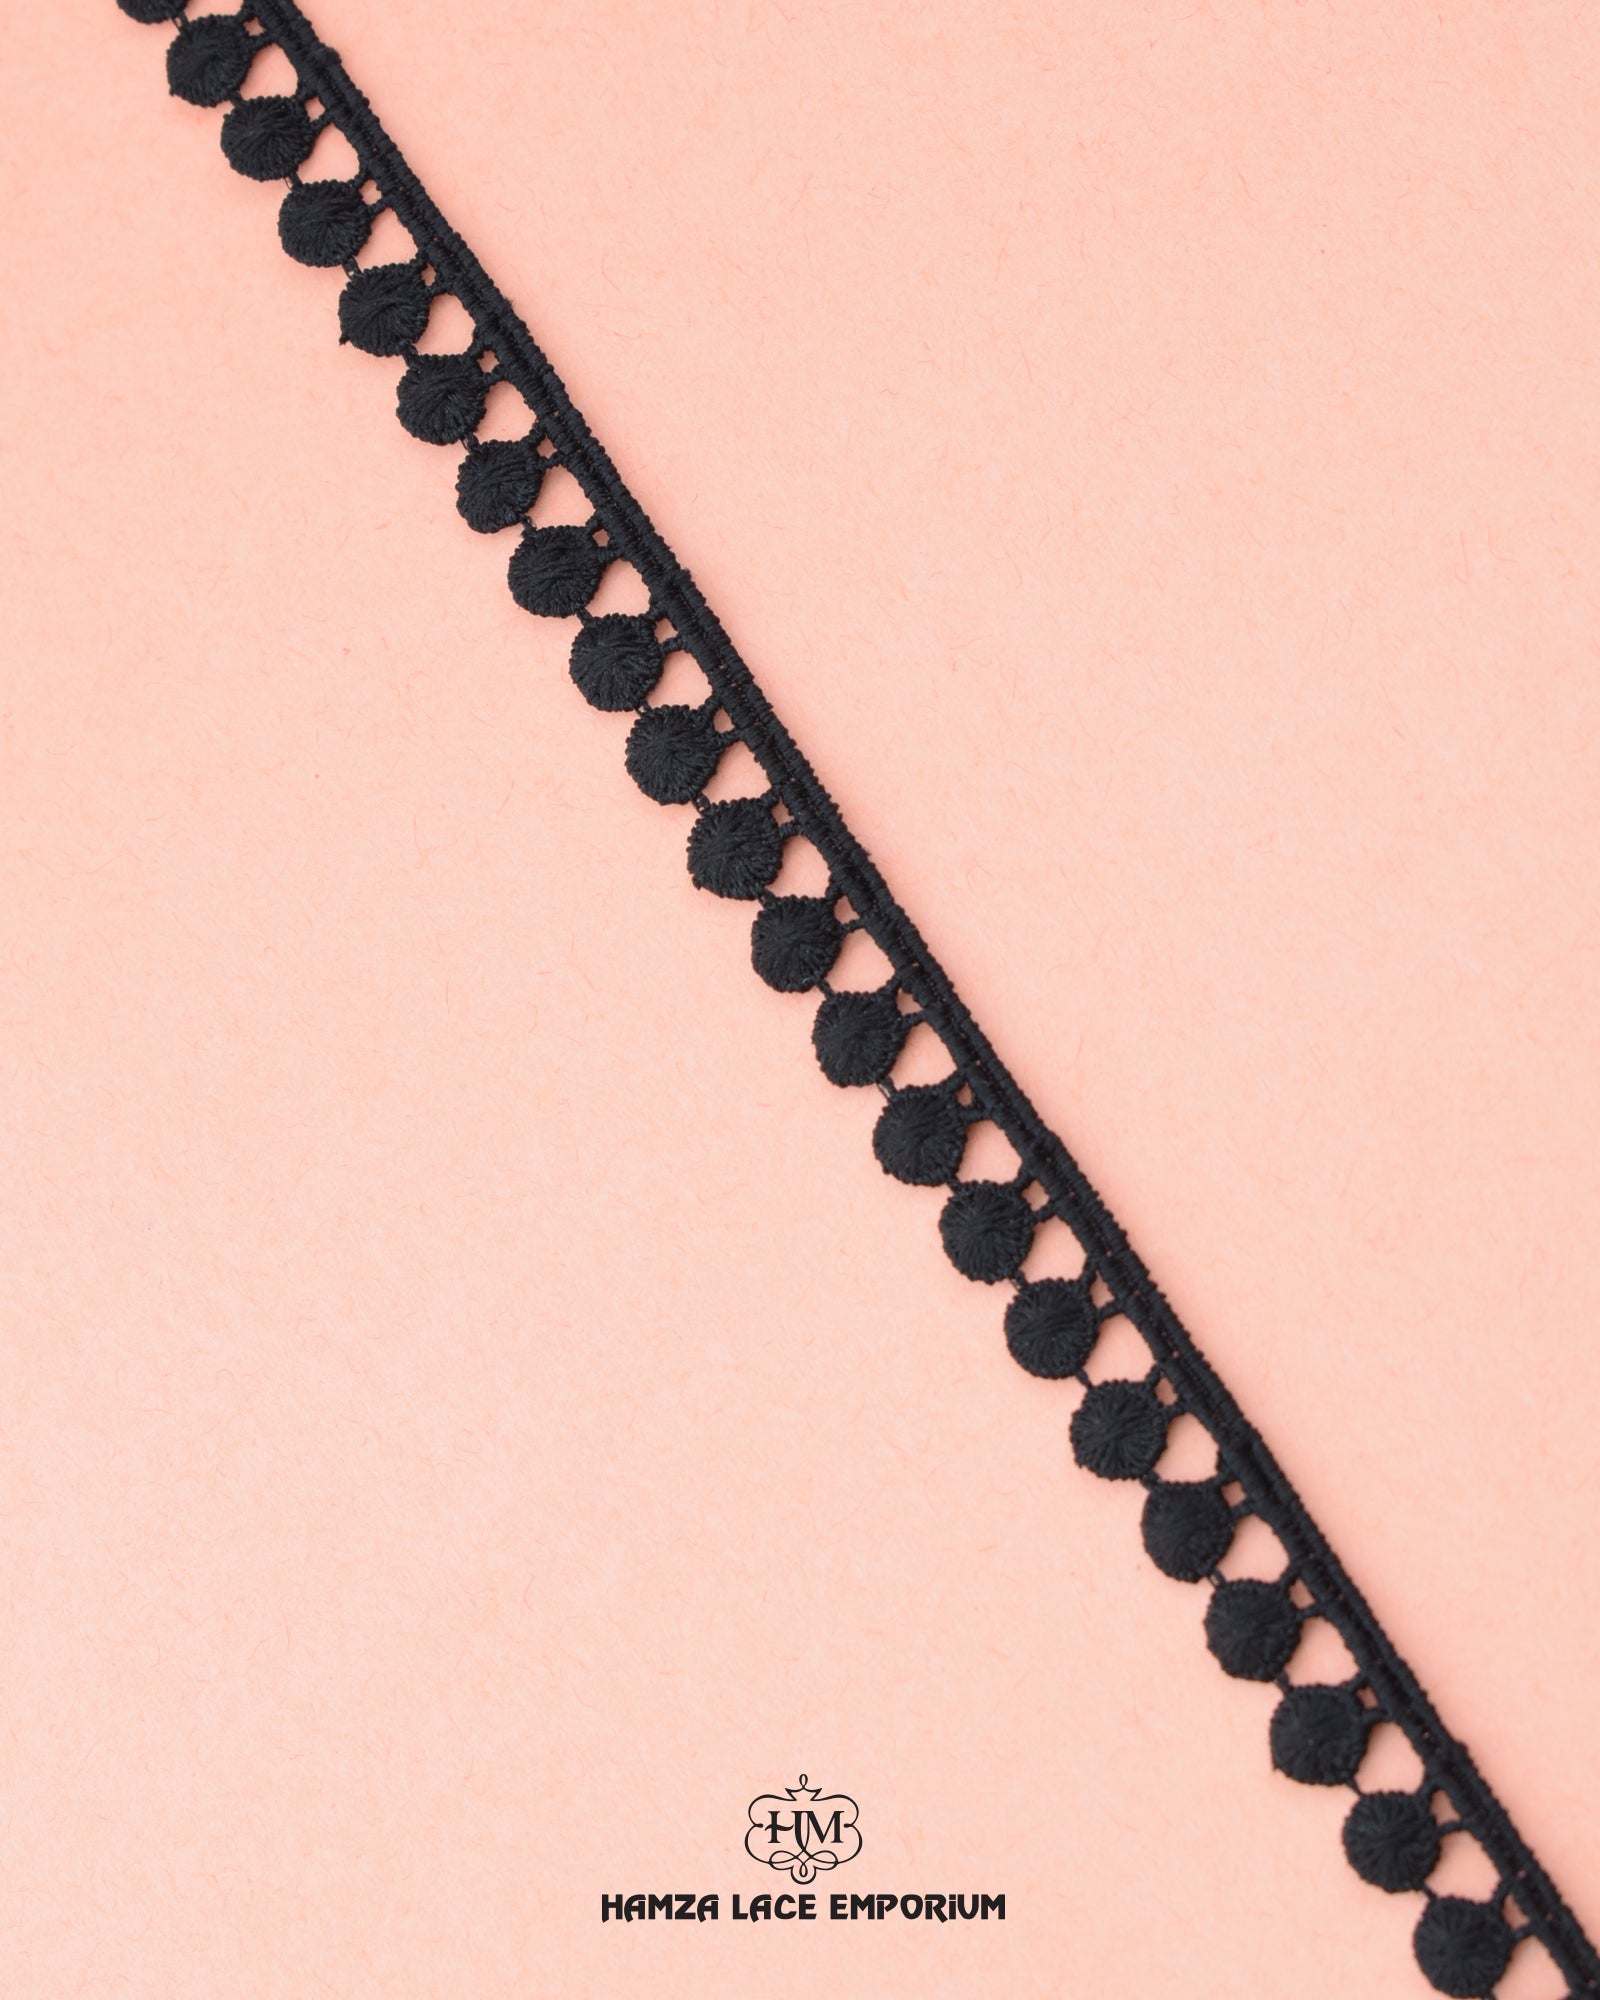 The black color 'Edging Ball Lace 21554' is shown on a pink background